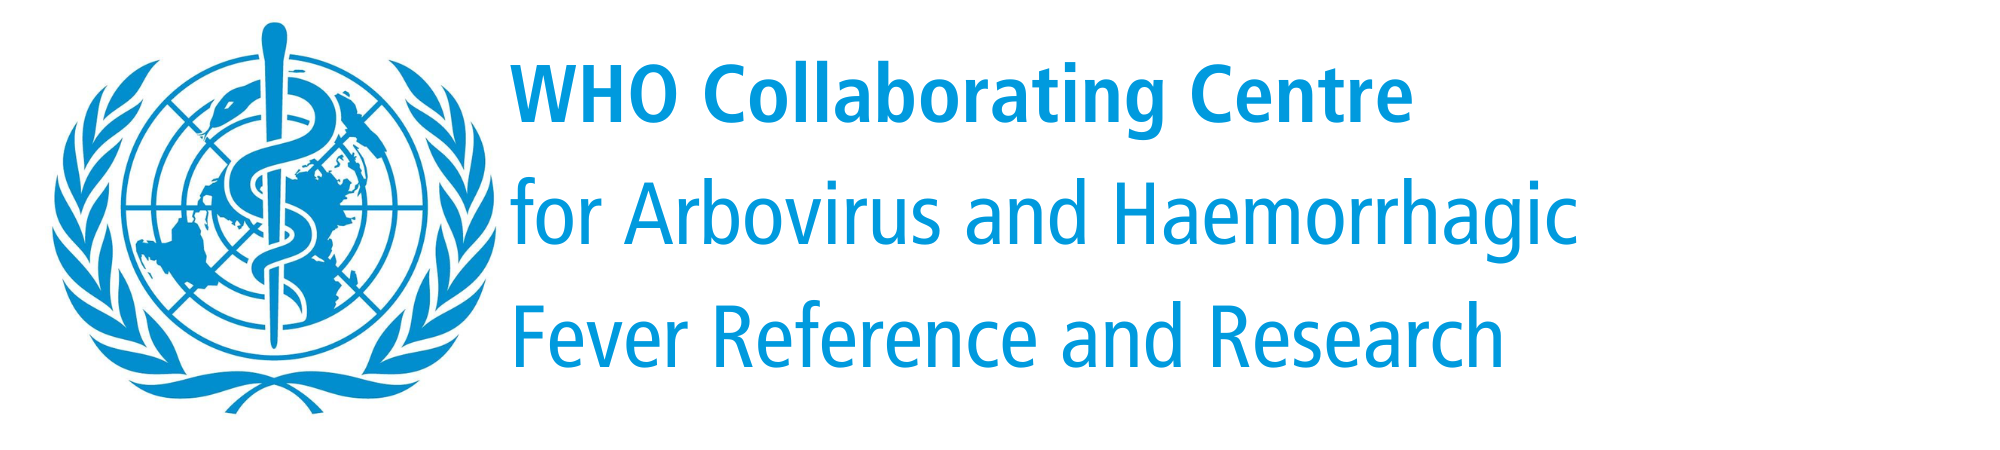 The logo of the WHO is shown on a white background. A staff of Asclepius in front of a world map with a blue wreath. Next to it in blue letters is the WHO Collaborating Centre for Arbovirus and Haemorrhagic Fever Reference and Research.